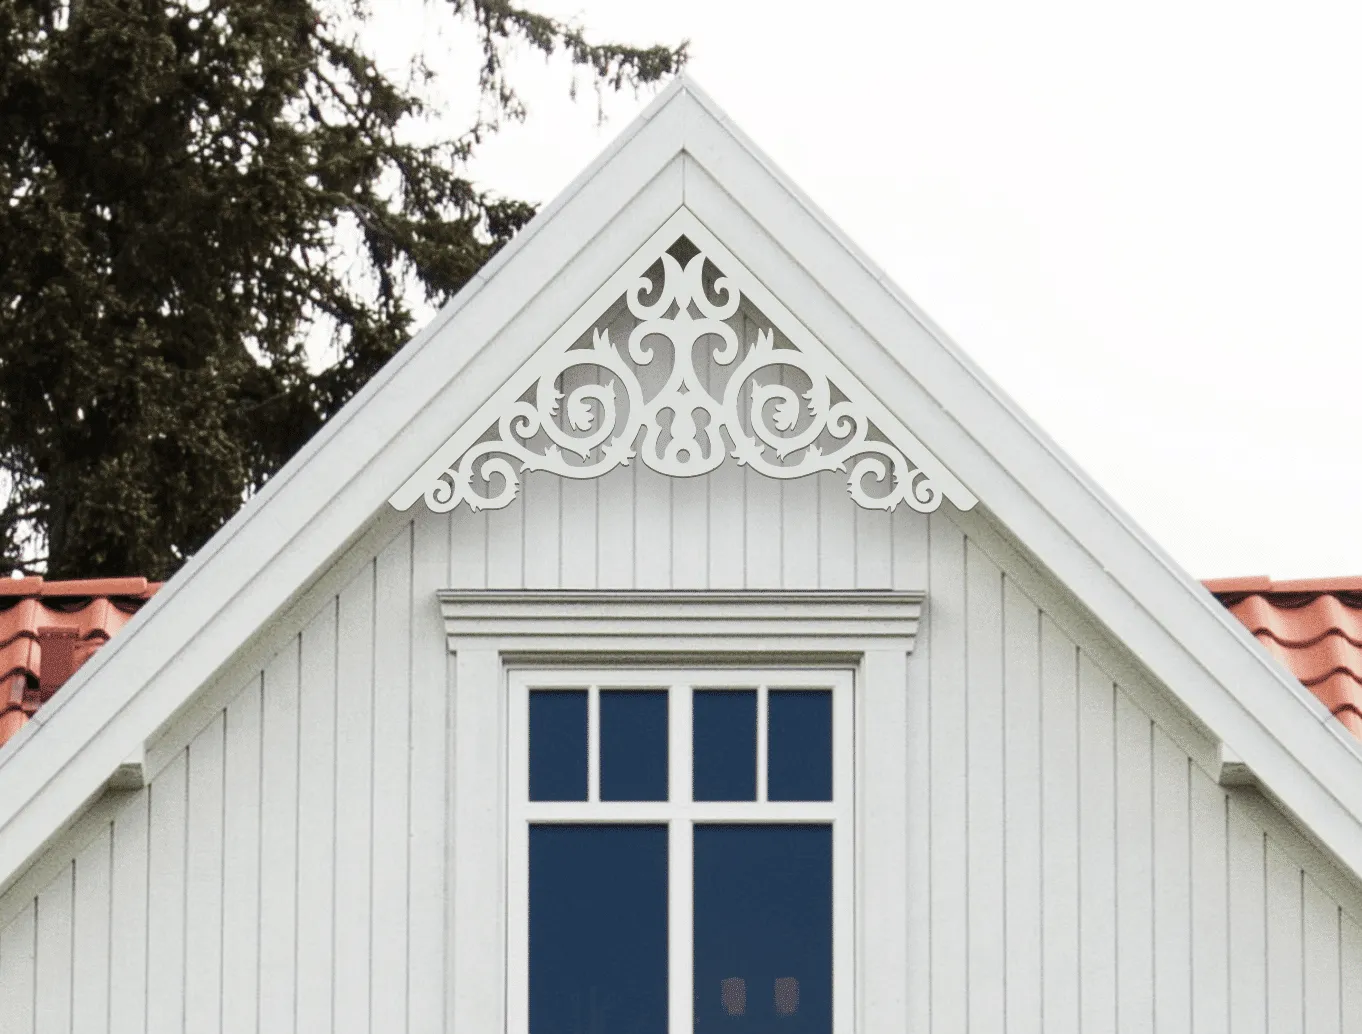 Gable pediment 012 - A white house with decorative wooden victorian millwork as house decoration for roof and gable end.